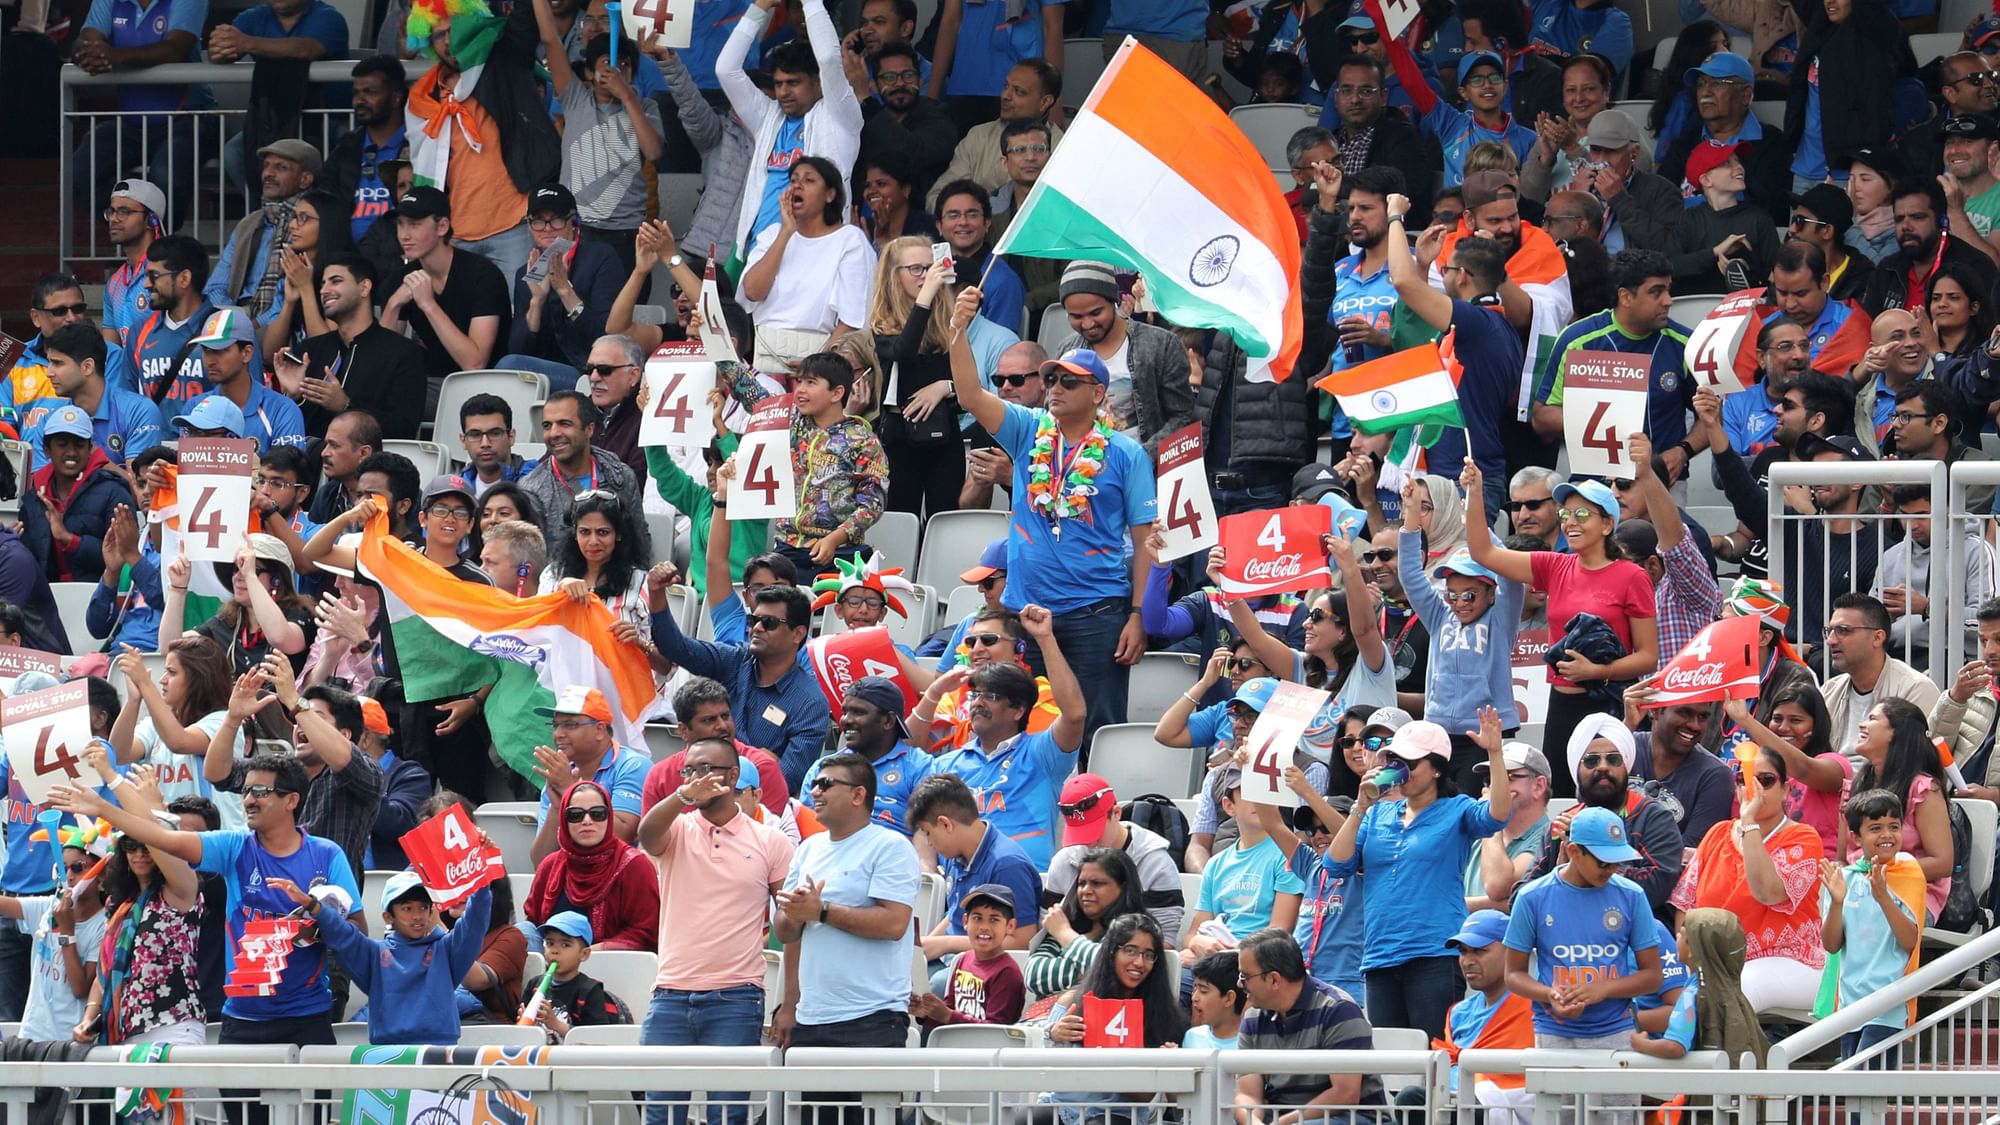 Indian cricket fans cheer for their team during the Cricket World Cup semifinal match between India and New Zealand at Old Trafford in Manchester, Wednesday, 10 July.